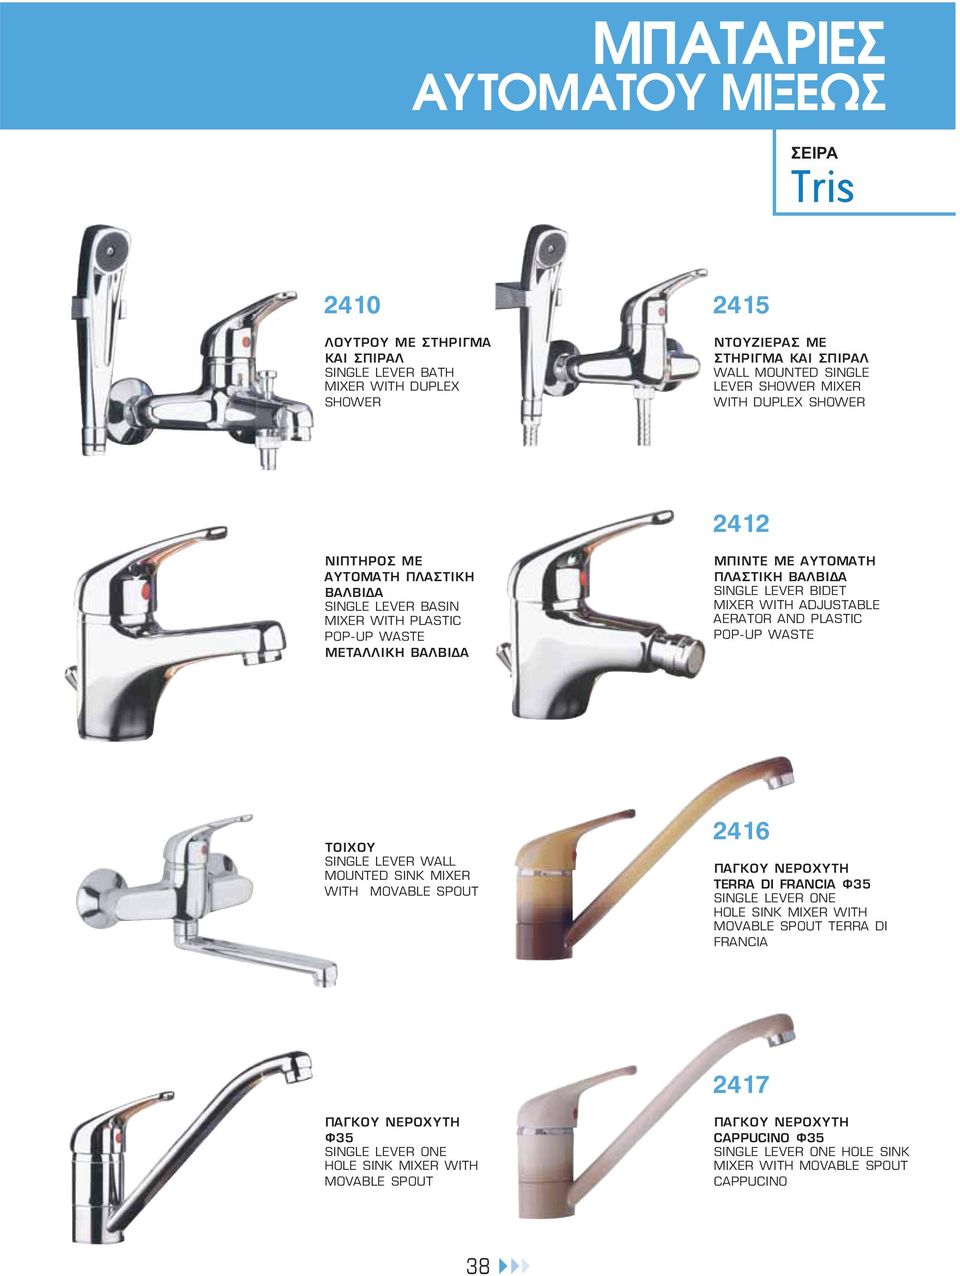 MIXER WITH ADJUSTABLE AERATOR AND PLASTIC POP-UP ΤΟΙΧΟΥ SINGLE LEVER WALL MOUNTED SINK MIXER WITH MOVABLE SPOUT 2416 TERRA DI FRANCIA Φ35 SINGLE LEVER ONE